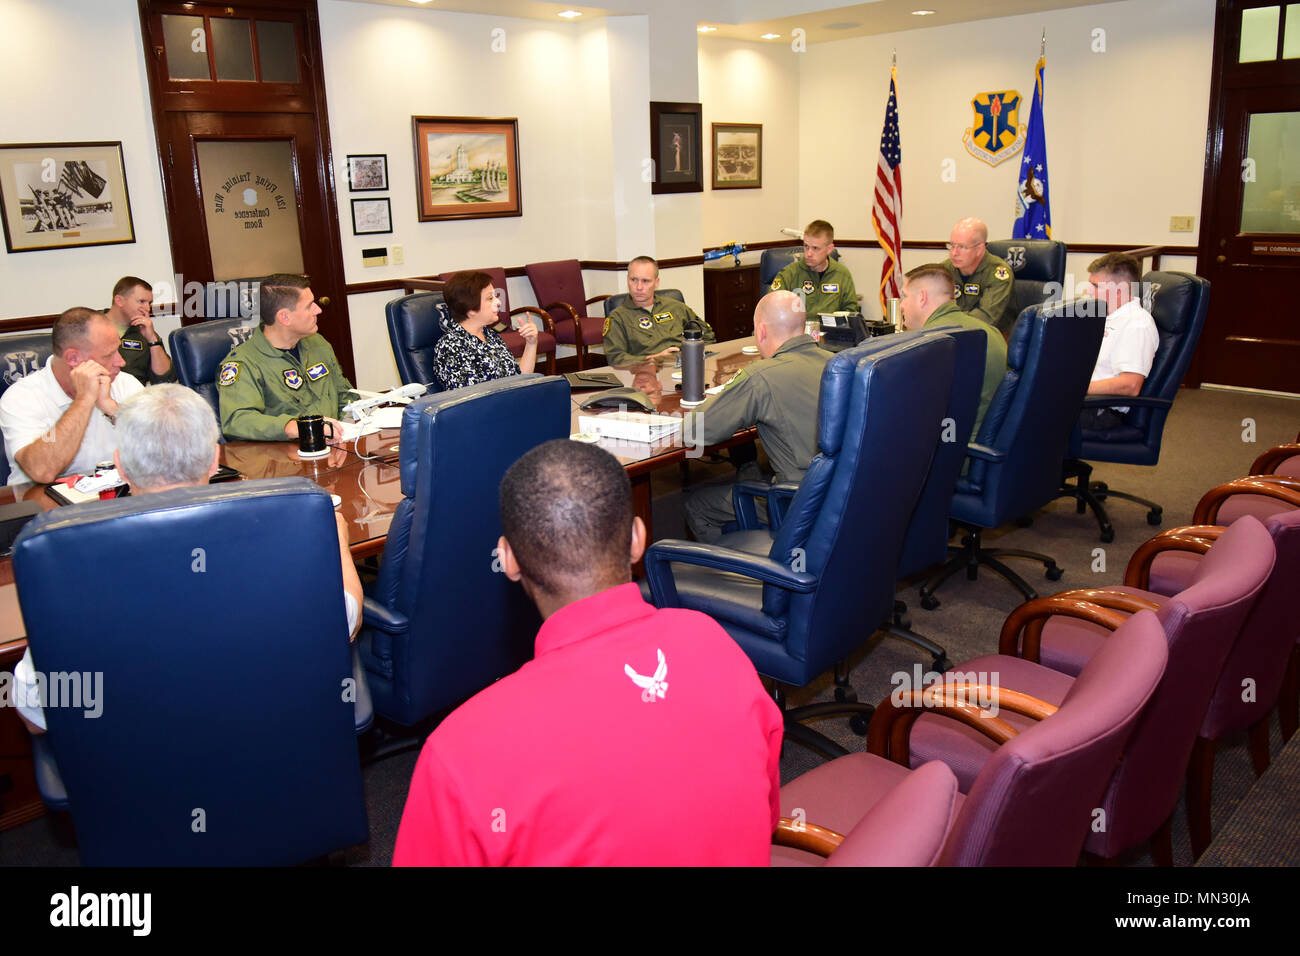 Col. Joel Carey, the 12th Flying Training Wing Commander, at the head of the table, listens to Angela Kochart, the 12th FTW's chief resource manager during an early morning senior leader team meeting August 25, 2017 at Joint Base San Antonio-Randolph, Texas.  Carey convened the meeting ahead of Hurricane Harvey's arrival on the Texas coast. Stock Photo